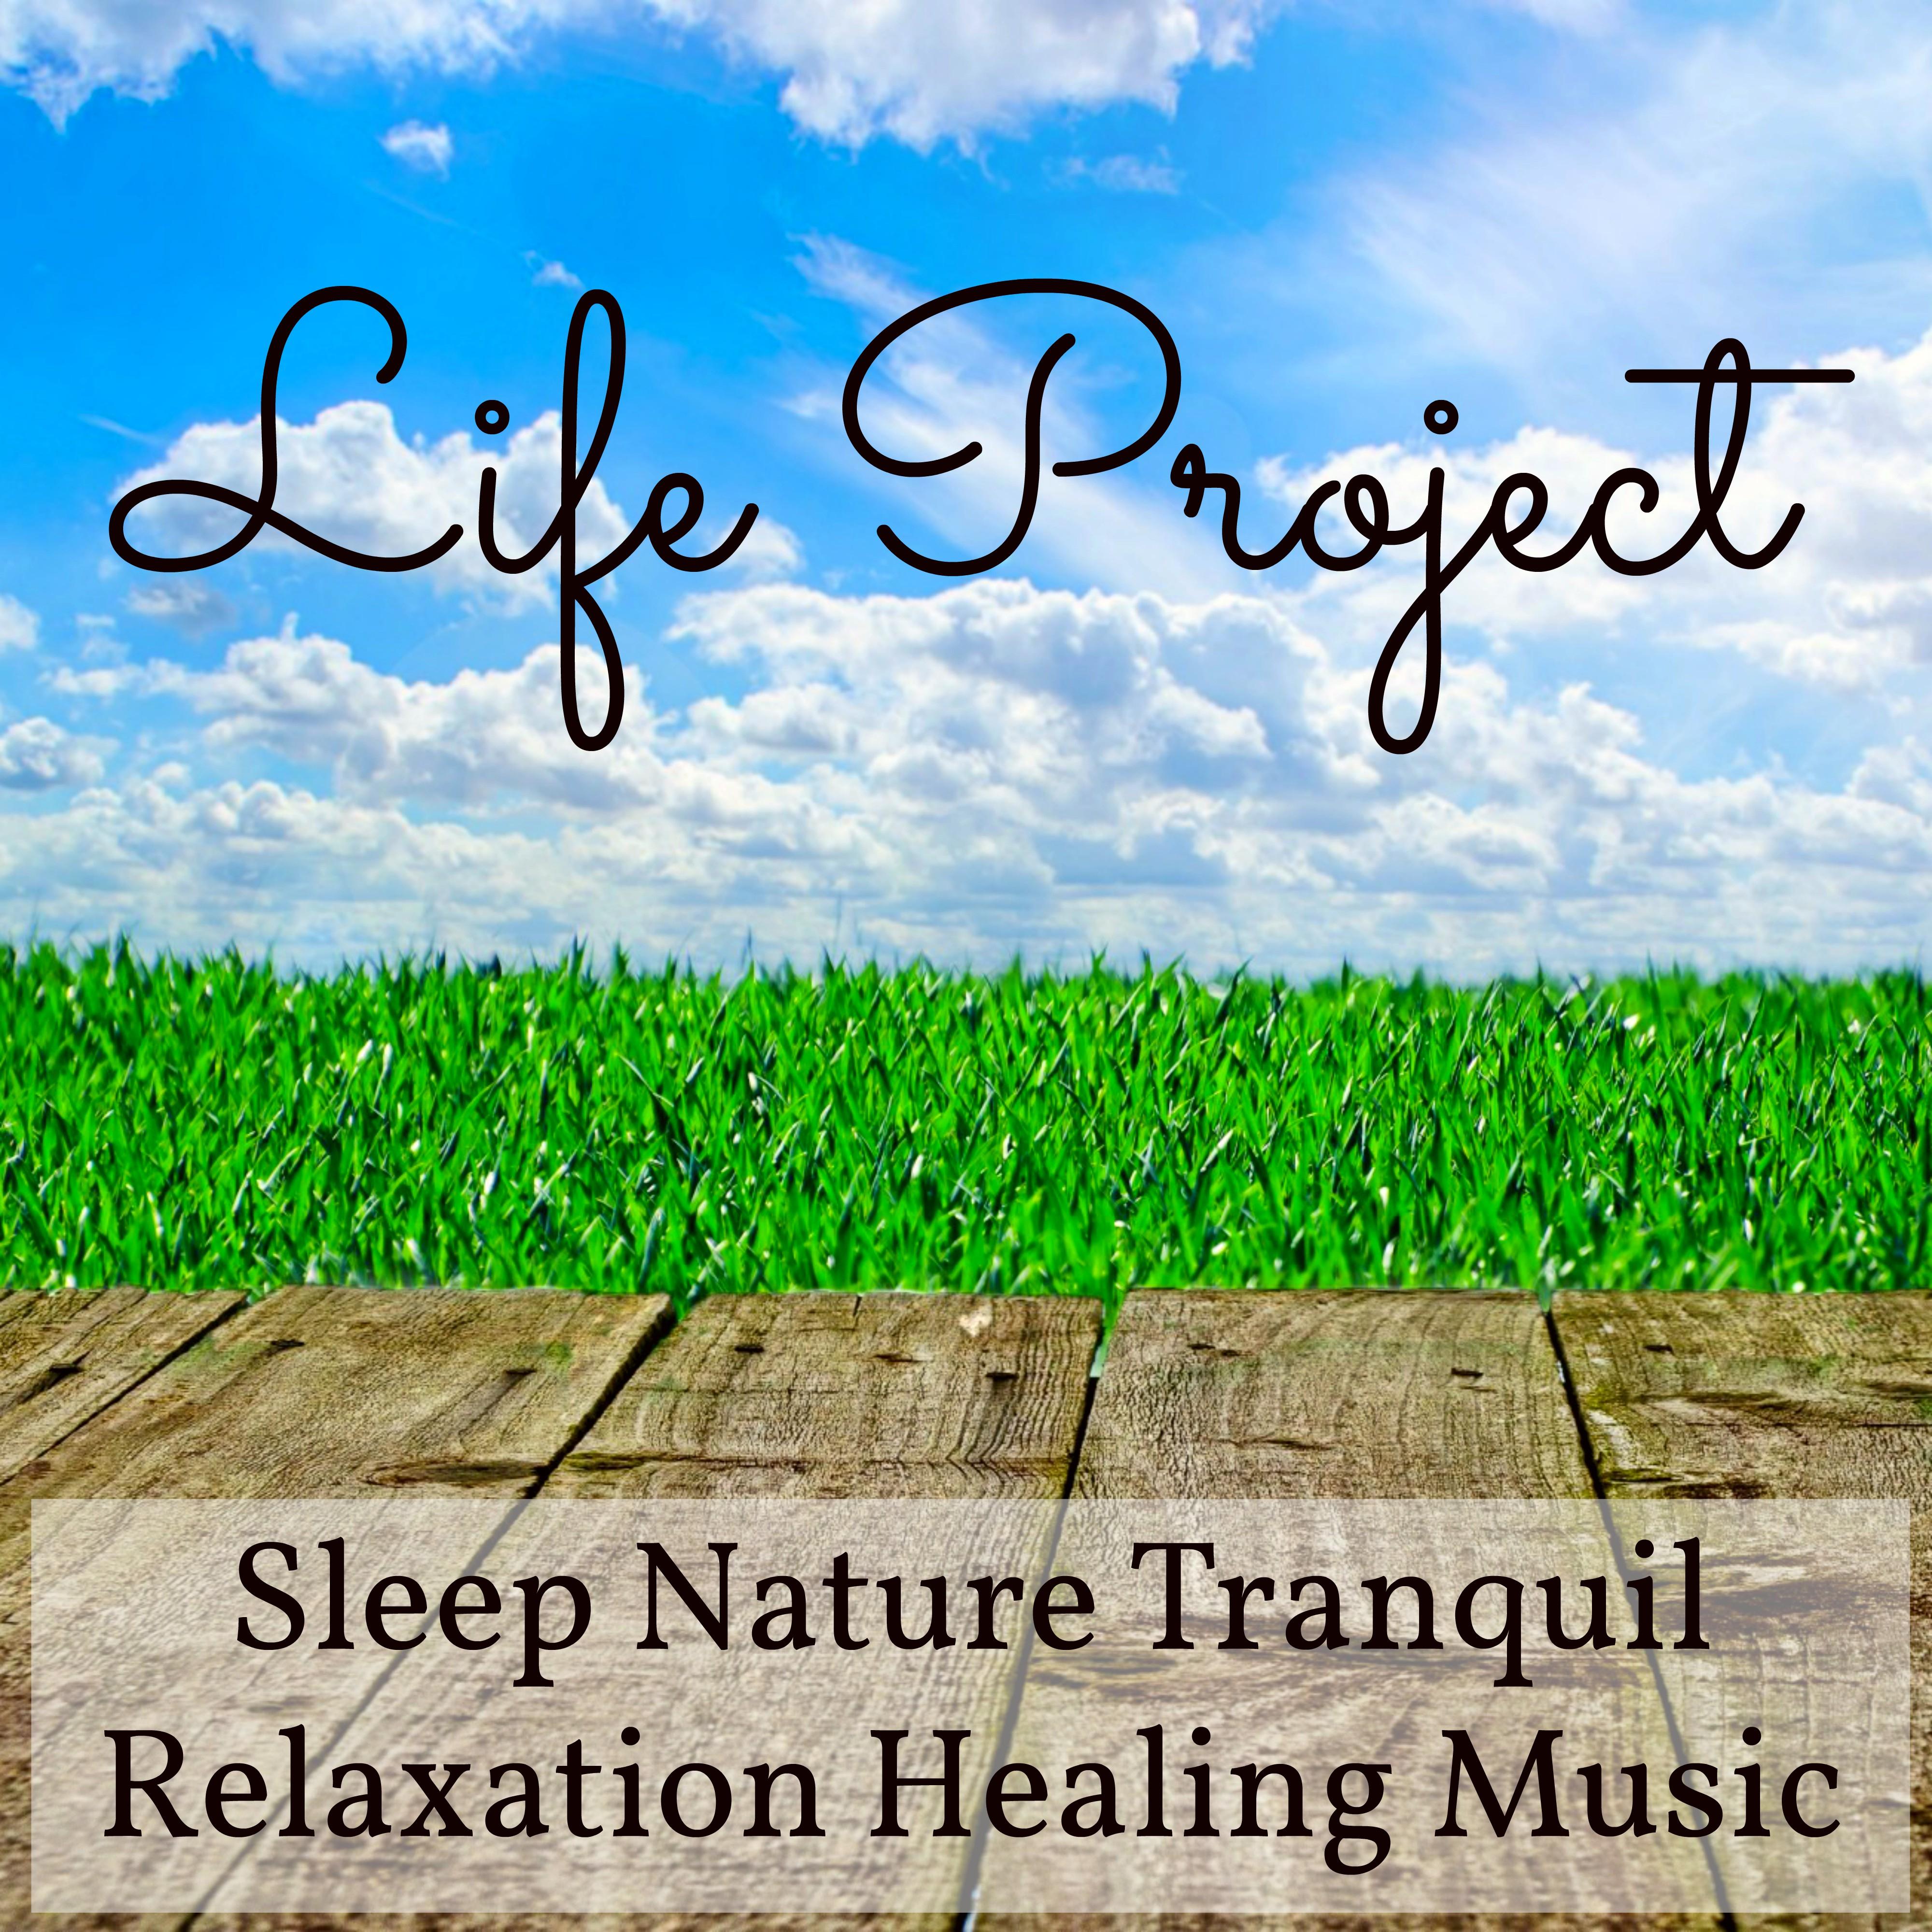 Life Project - Sleep Nature Tranquil Relaxation Healing Music with Calming Instrumental Meditative New Age